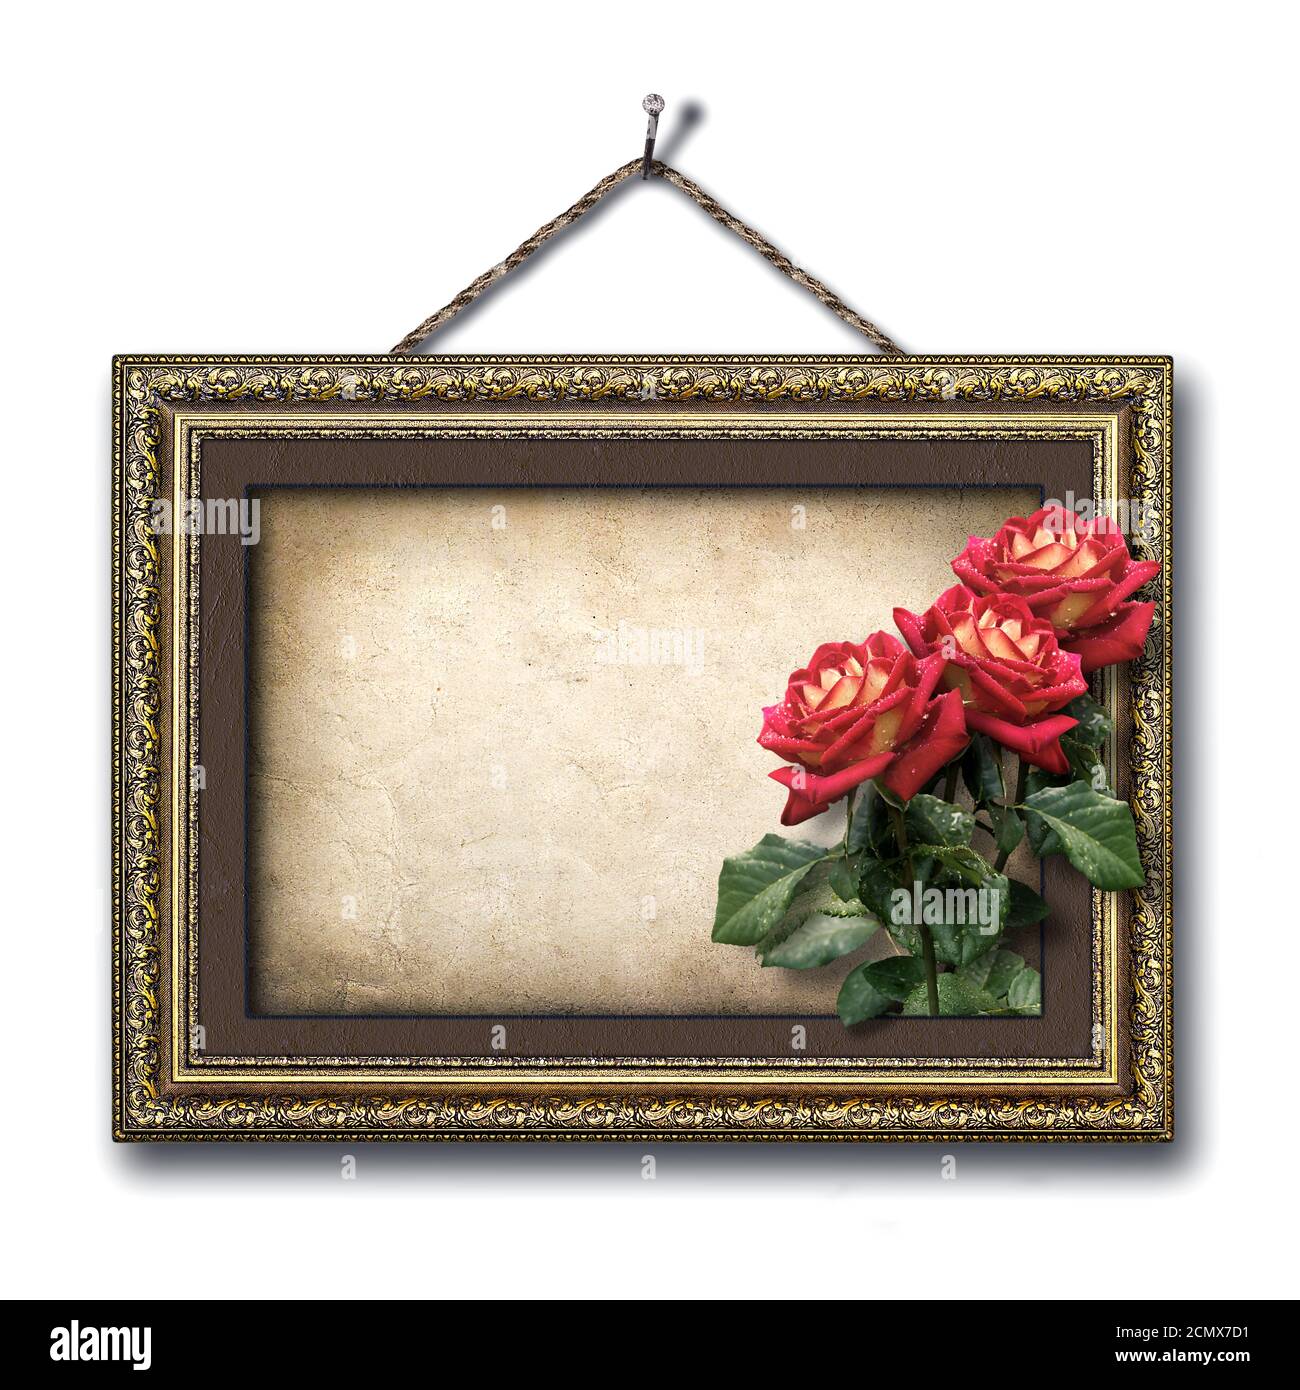 Vintage picture frame and a bouquet of red roses Stock Photo